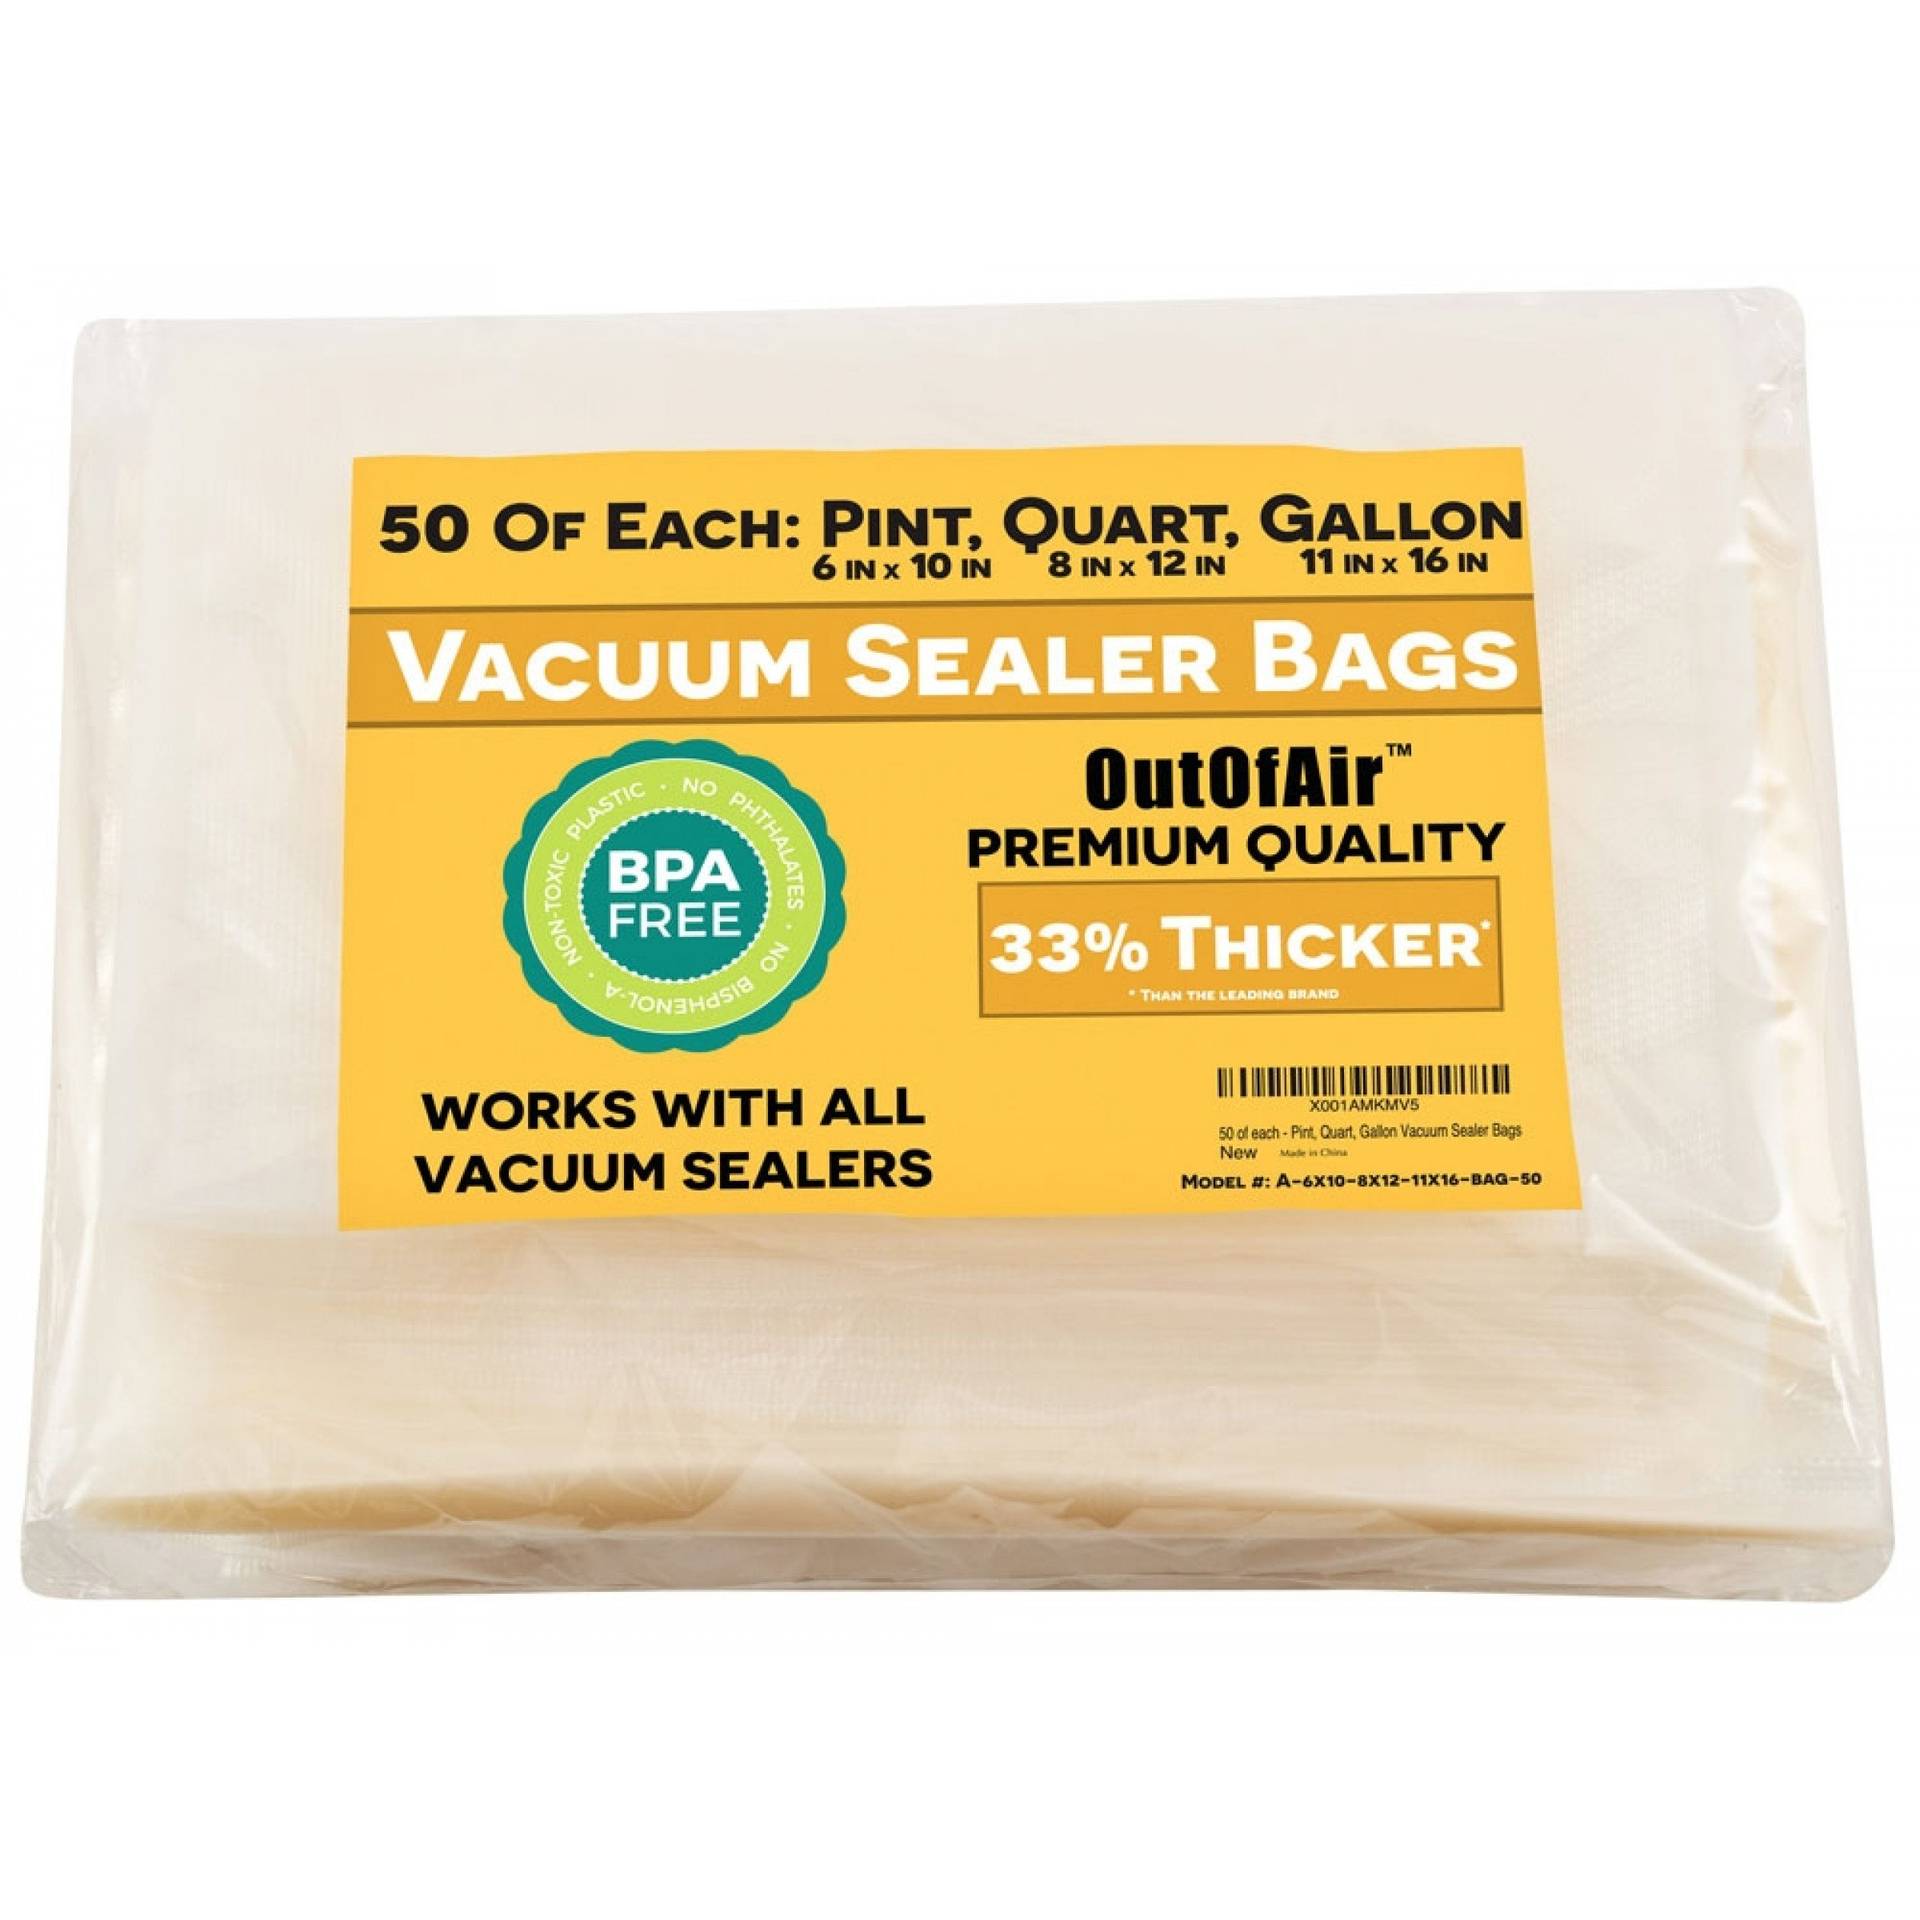 150 Vacuum Sealer Bags: 50 Pint (6 inch x 10 inch), 50 Quart (8 inch x 12 inch), 50 Gallon (11 inch x 16 inch) by OutOfAir - Works with Foodsaver 